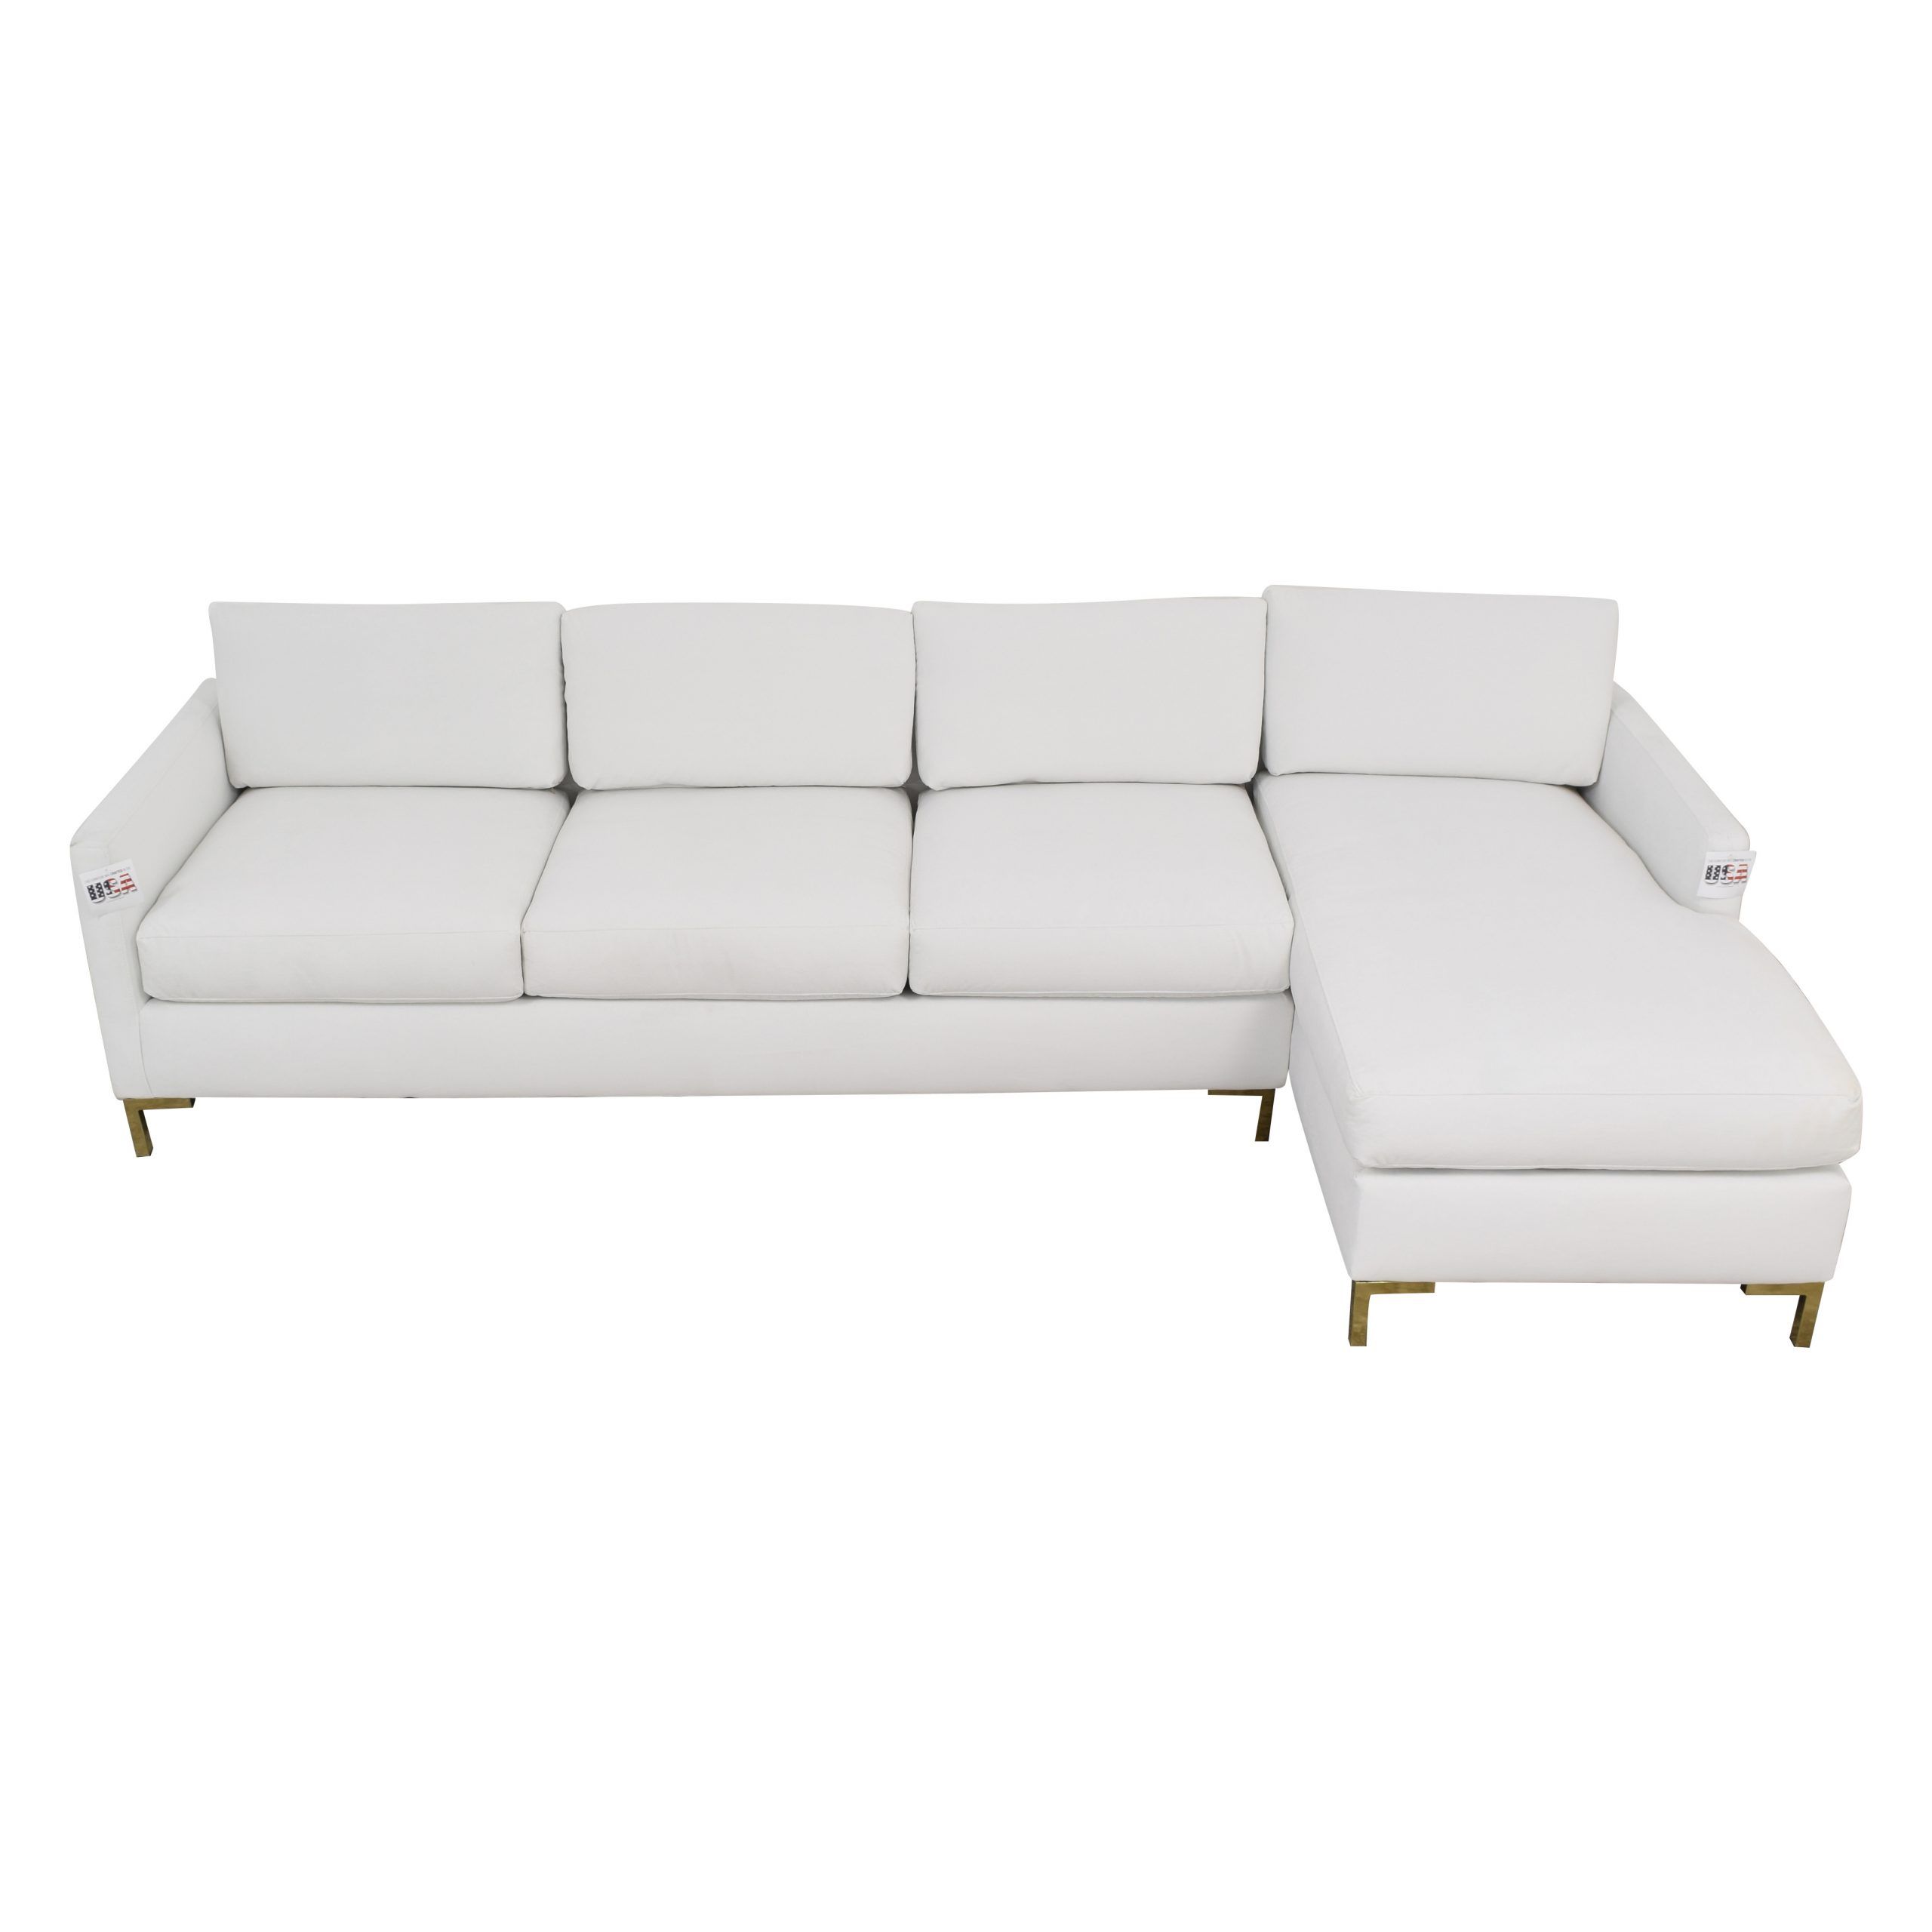 37% Off – The Inside The Inside Modern Sectional Right With Regard To Kiefer Right Facing Sectional Sofas (View 8 of 15)